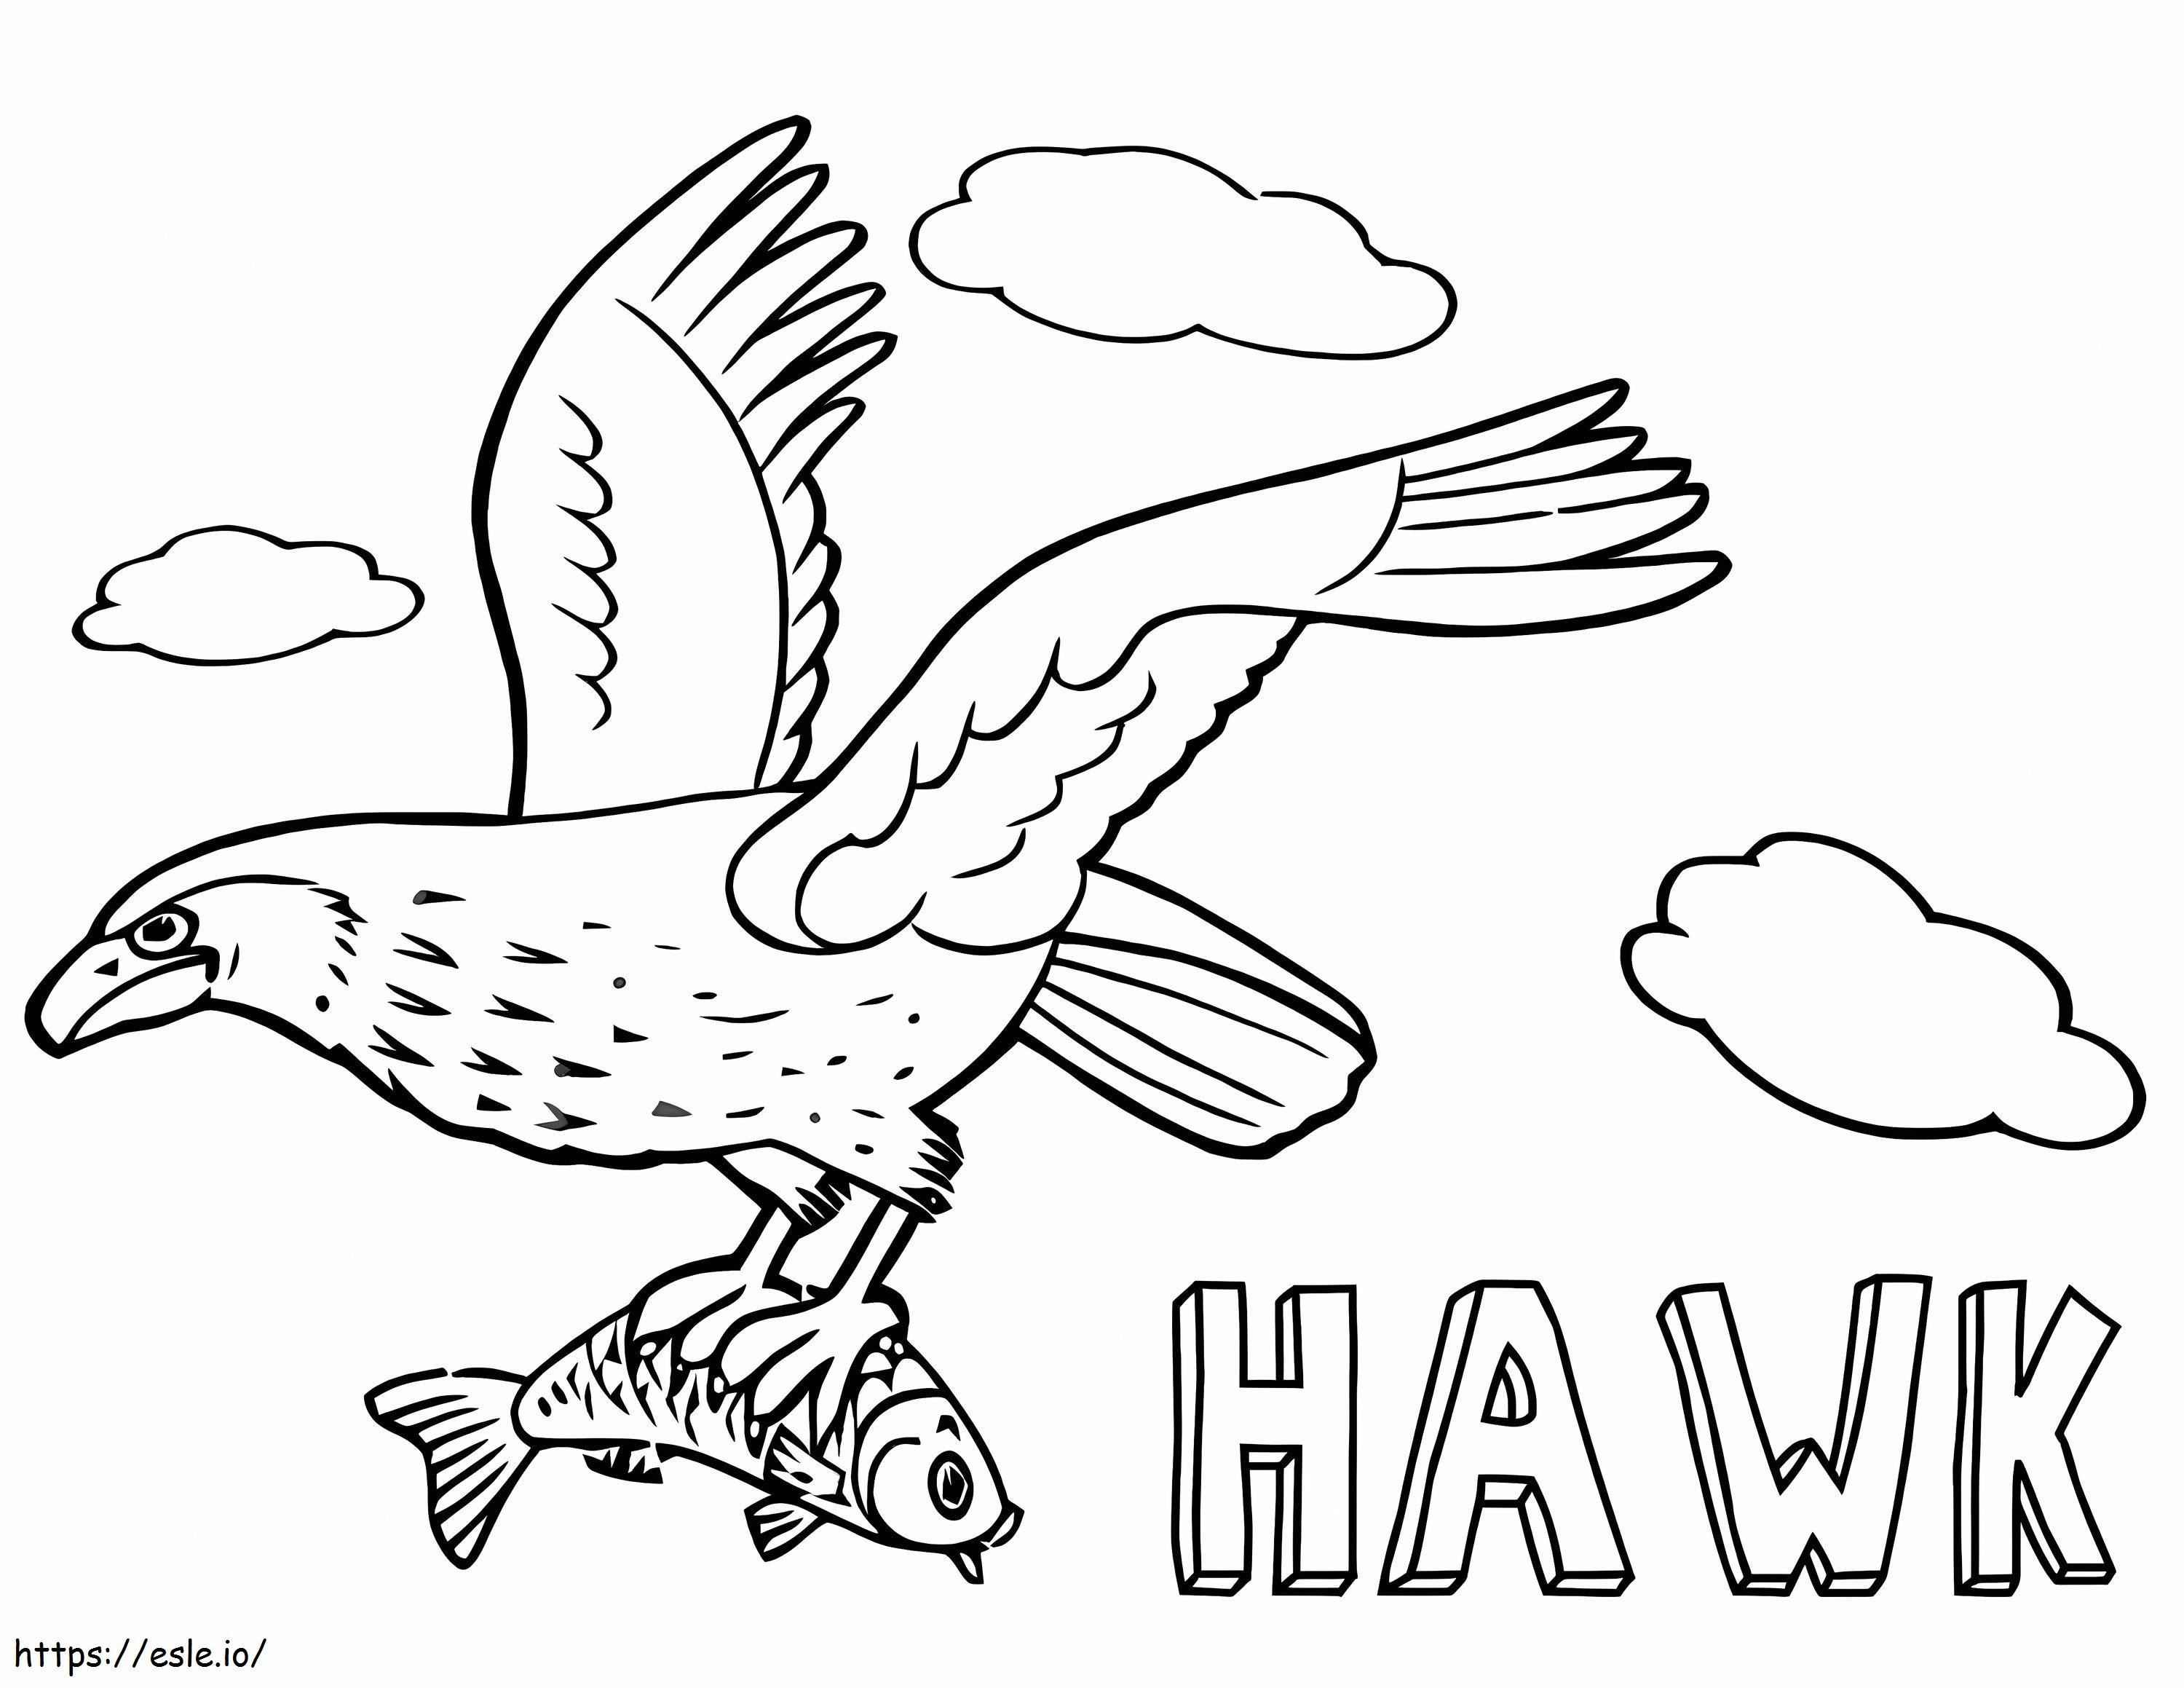 Hawk Catching Fish coloring page